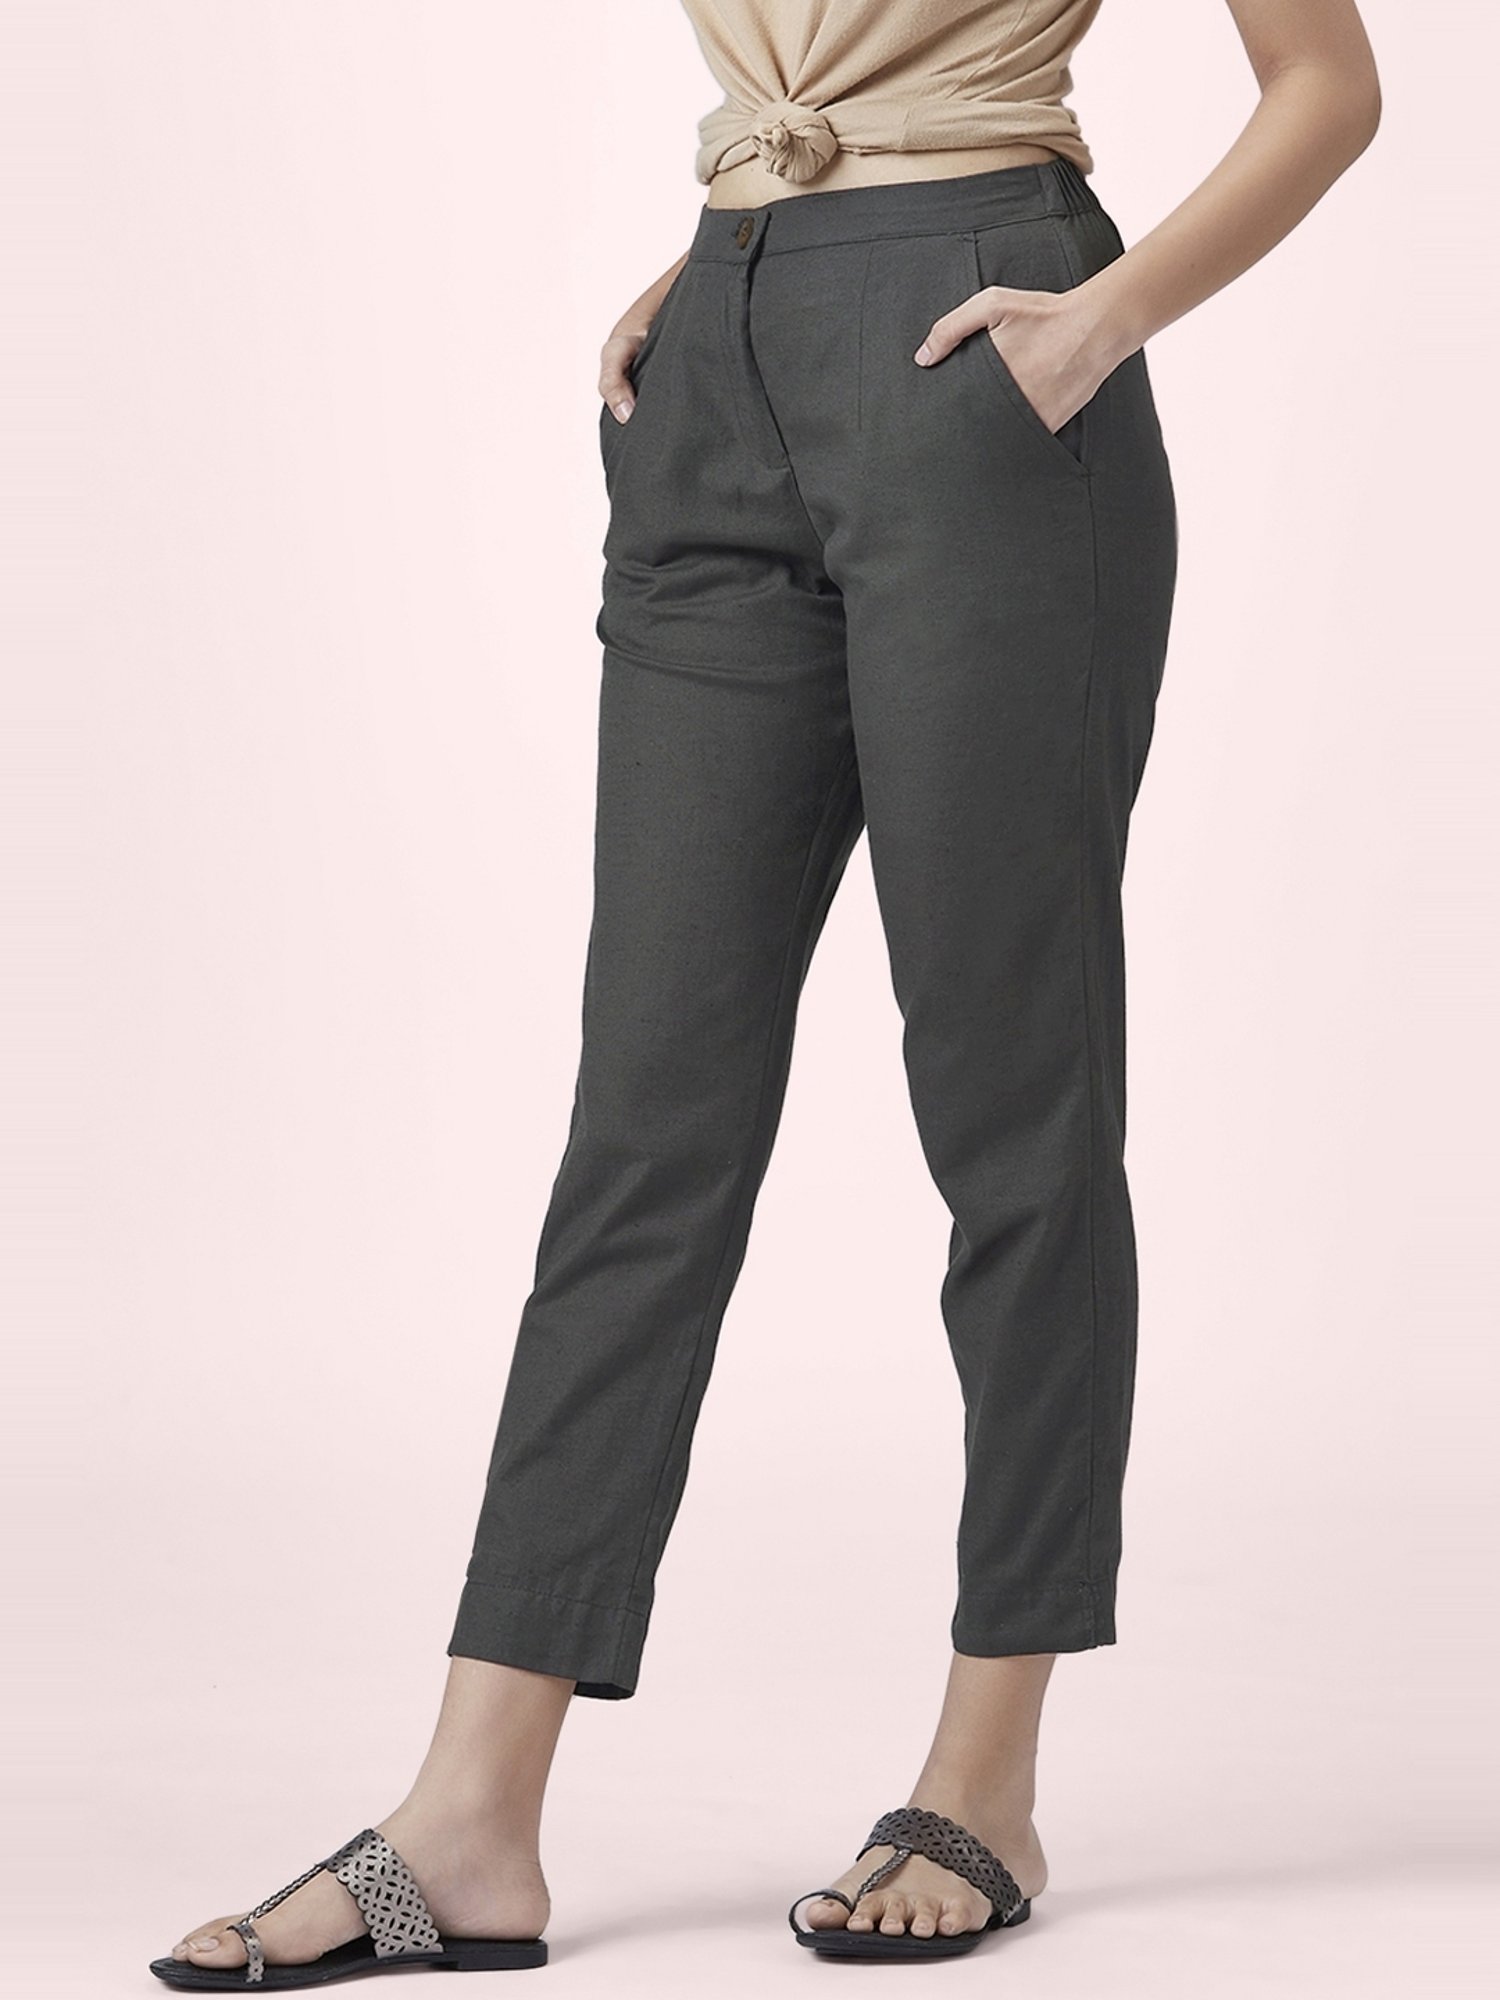 theRebelinme Trousers and Pants  Buy theRebelinme Plus Size Womens  Charcoal Grey Solid Color Cotton Ribbed Trouser Online  Nykaa Fashion